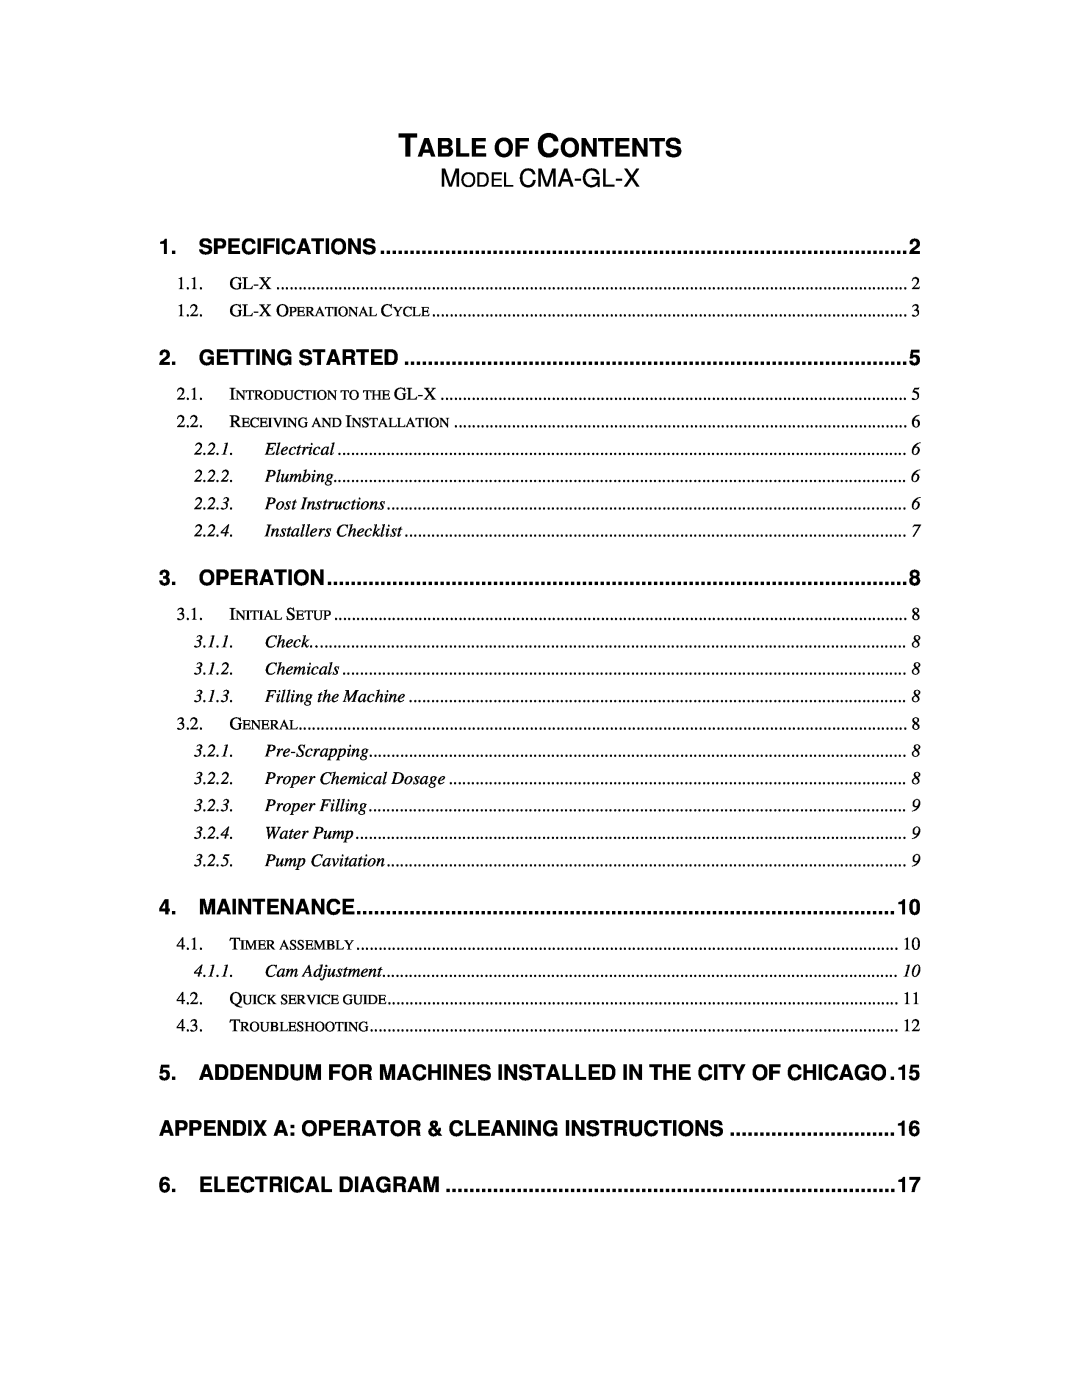 CMA Dishmachines GL-X owner manual Table Of Contents, Model Cma-Gl-X 